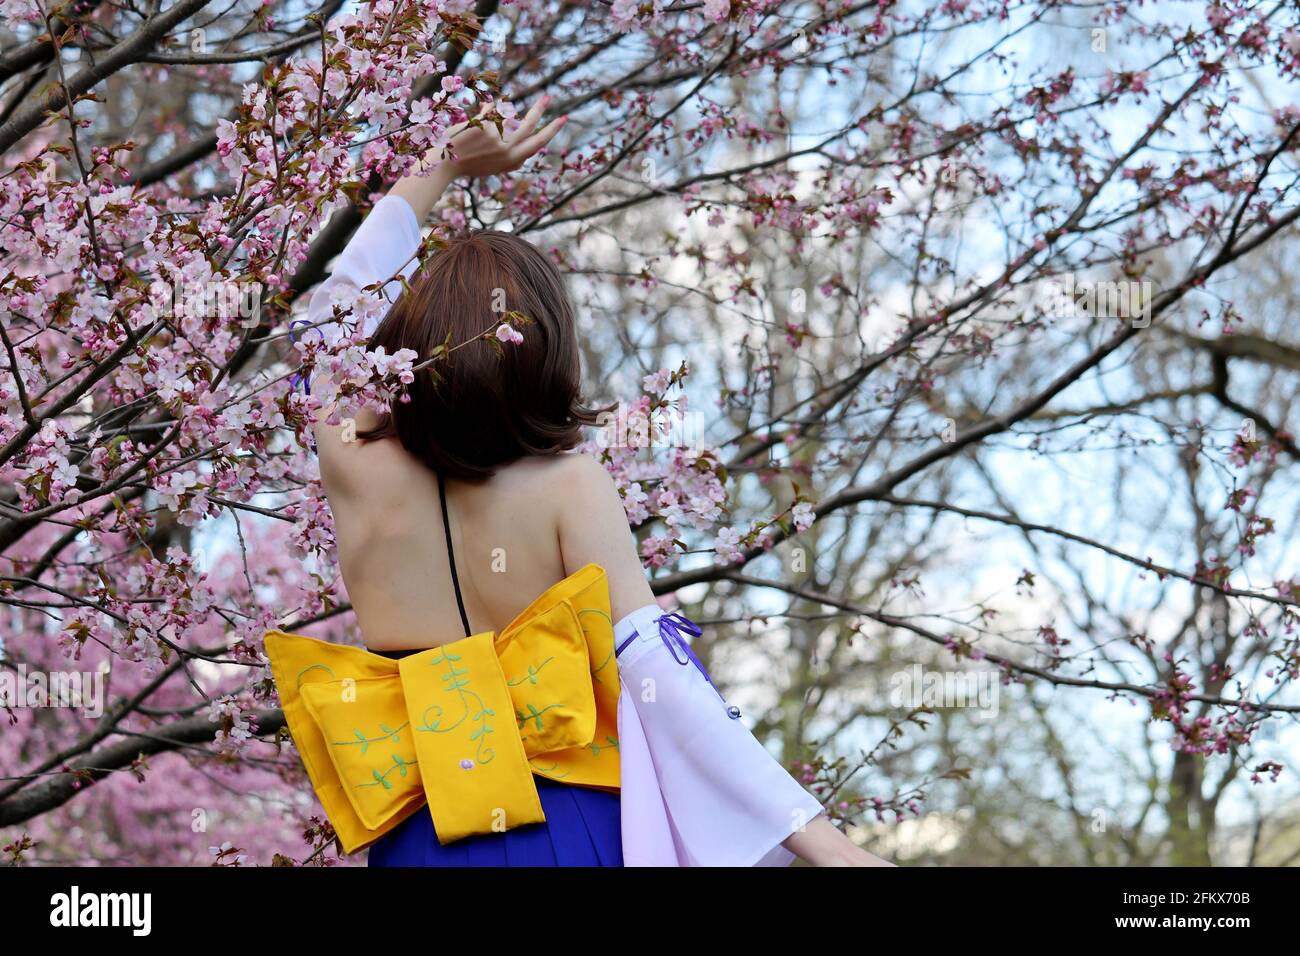 Girl in a traditional Japanese dress standing near the blooming sakura tree. Cherry blossom season, asian culture Stock Photo